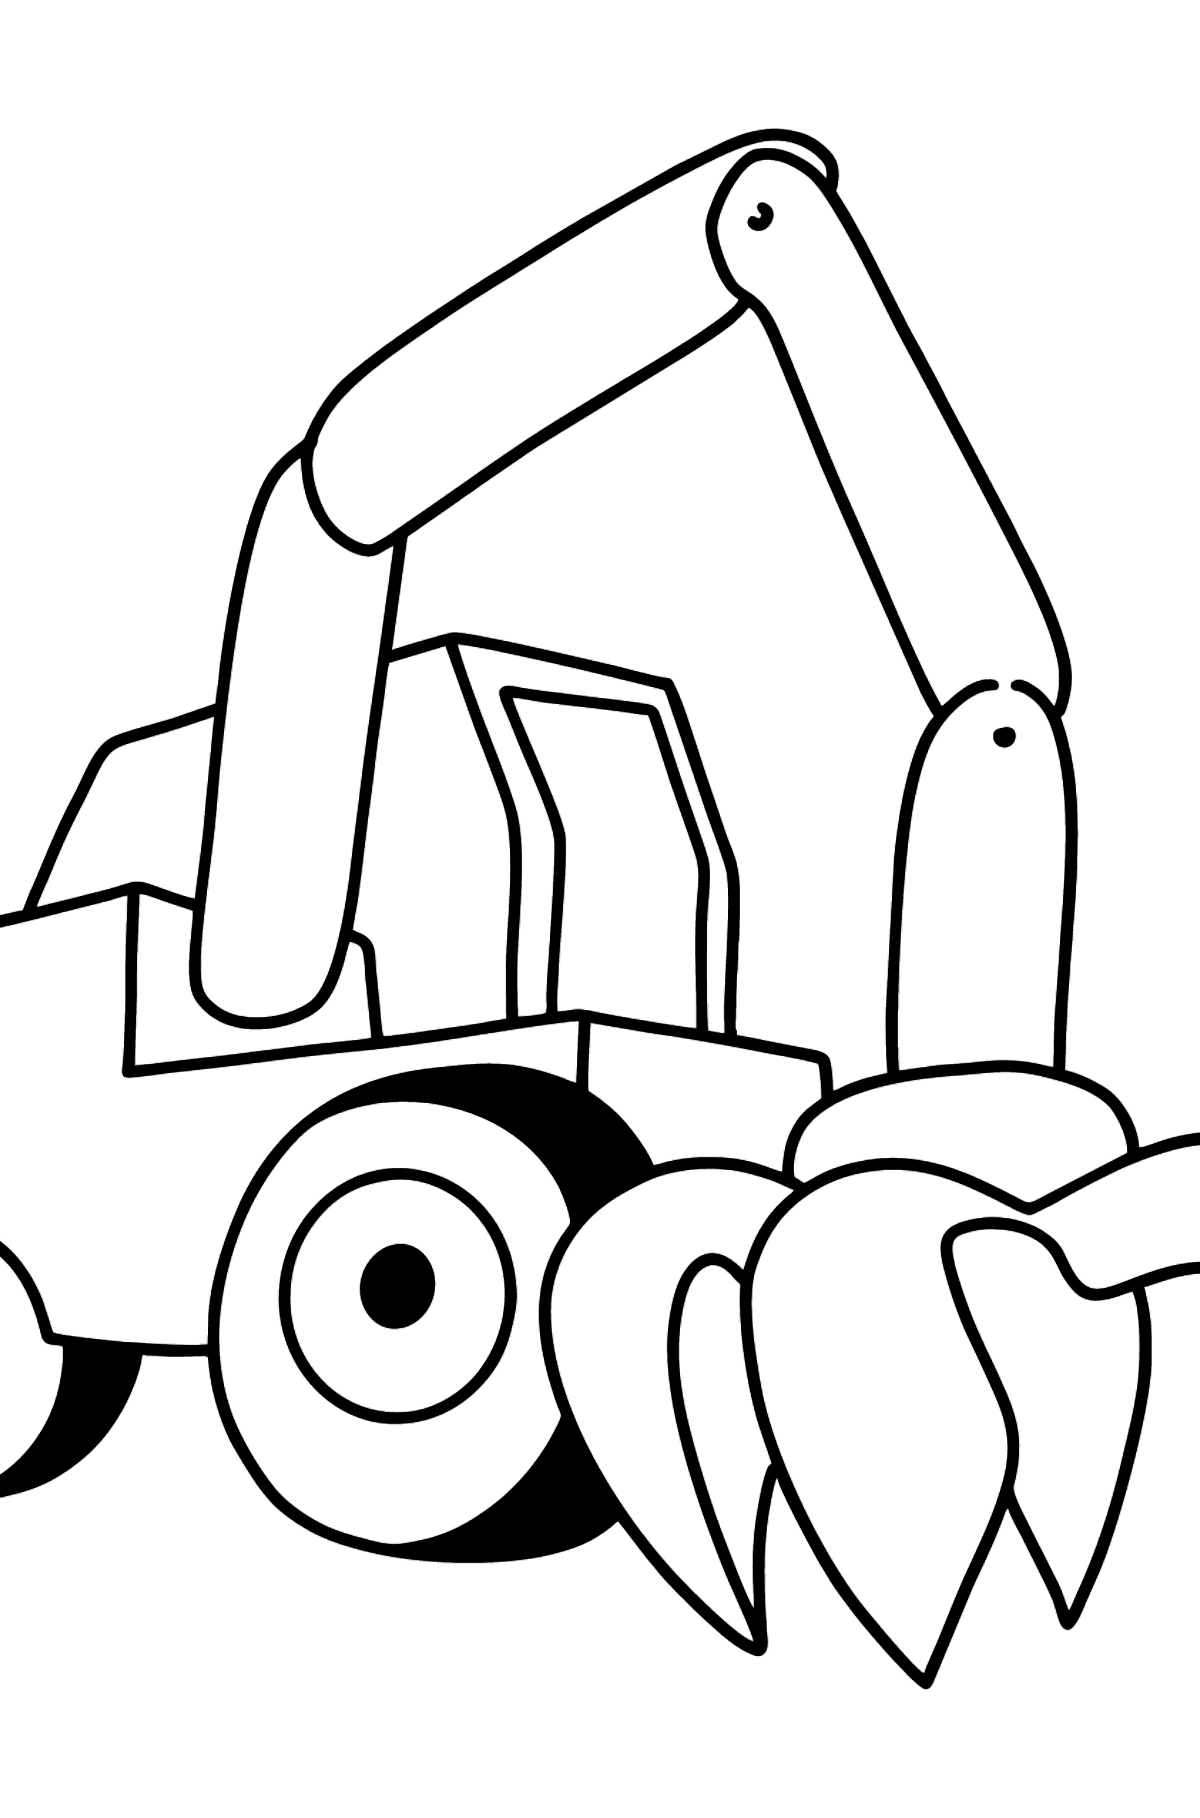 Construction Tractor coloring page - Coloring Pages for Kids